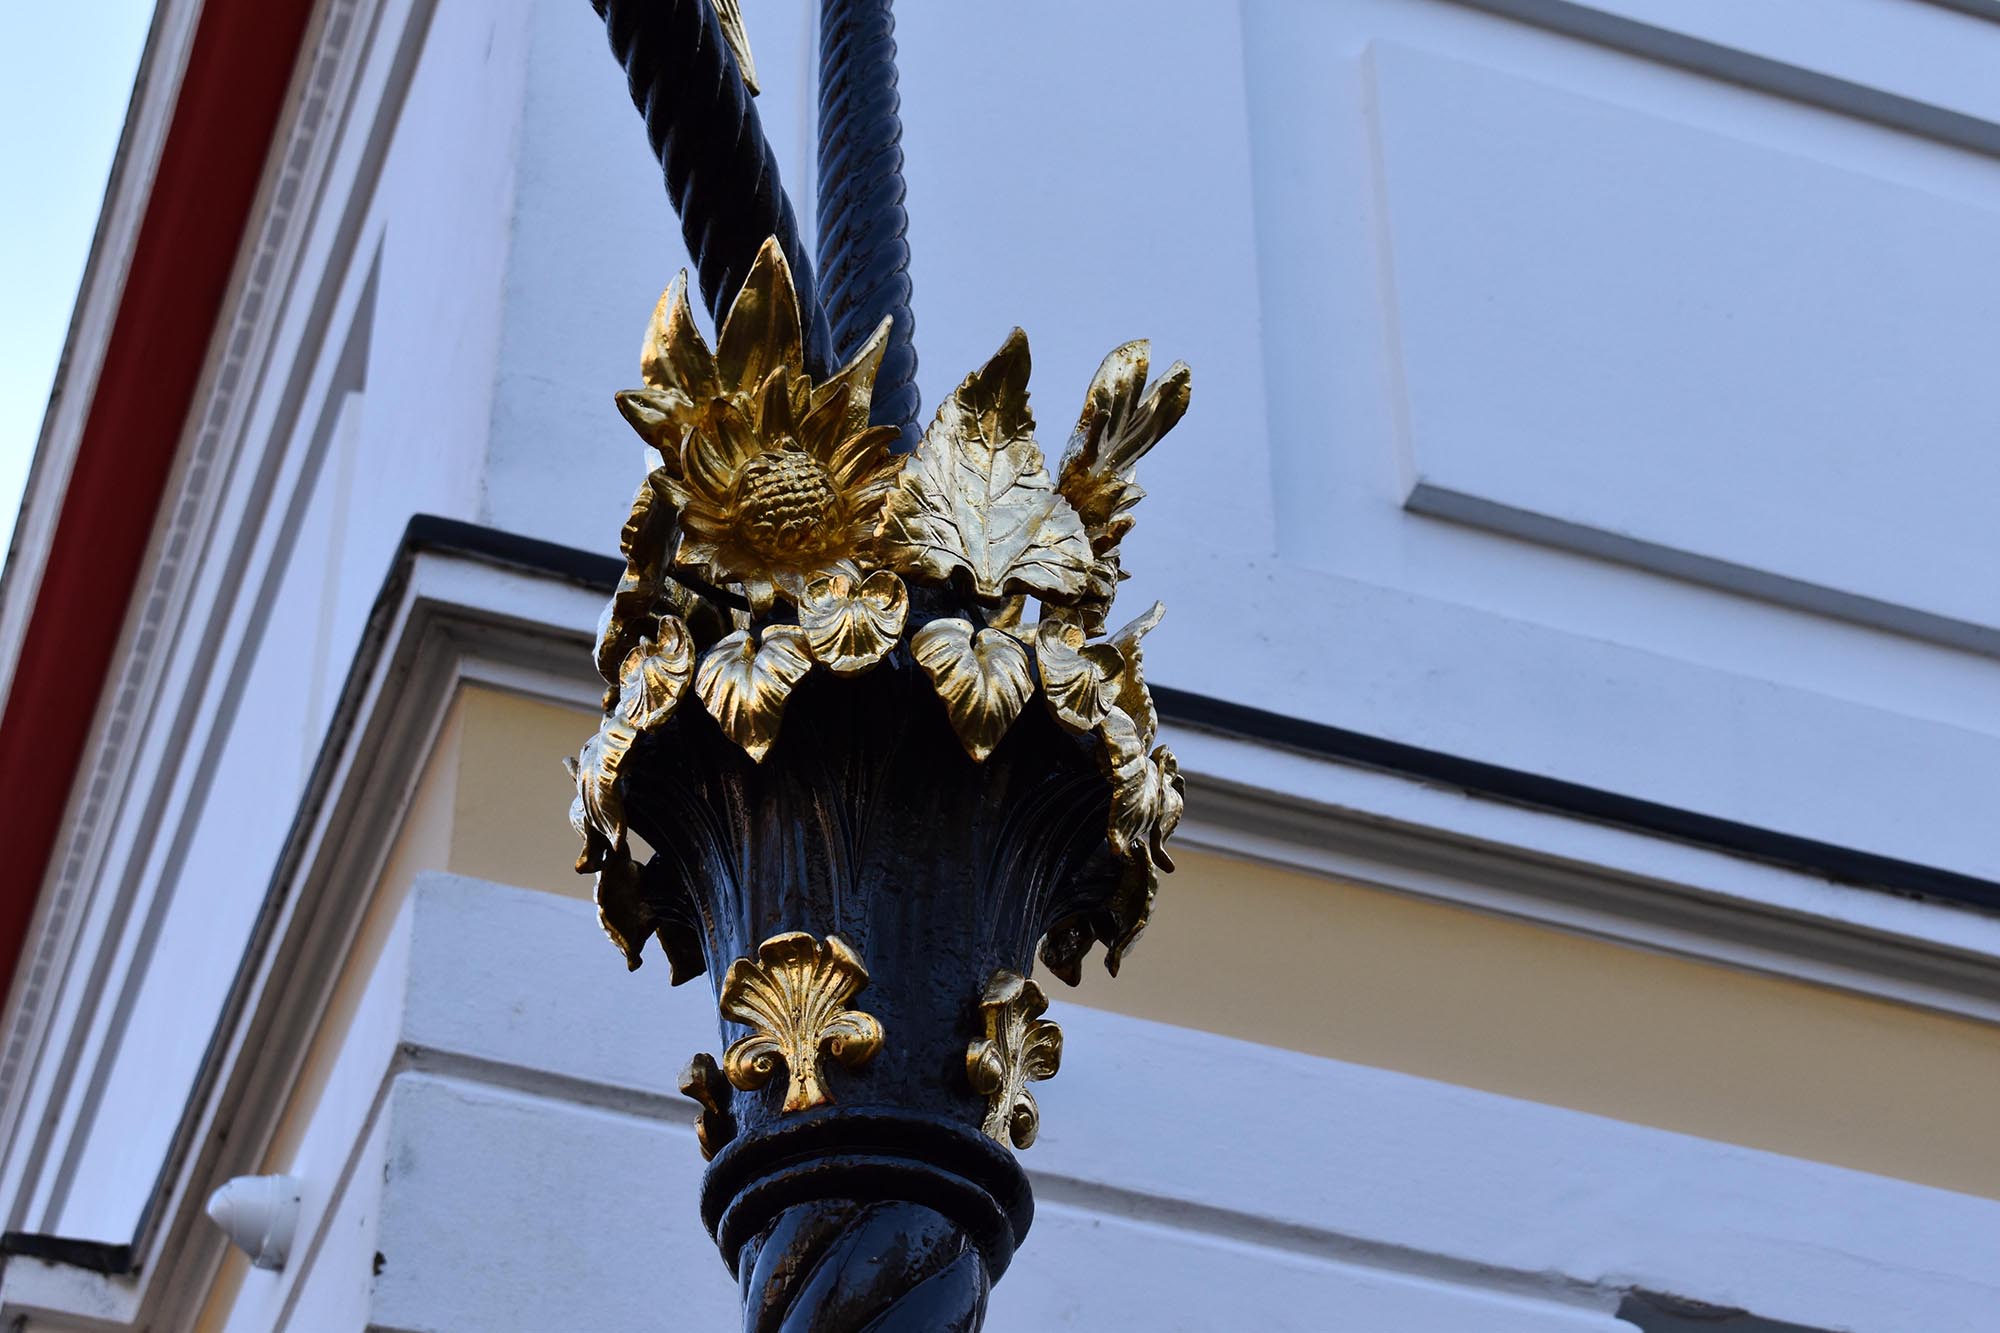 Gilded foliage on the lamp standard